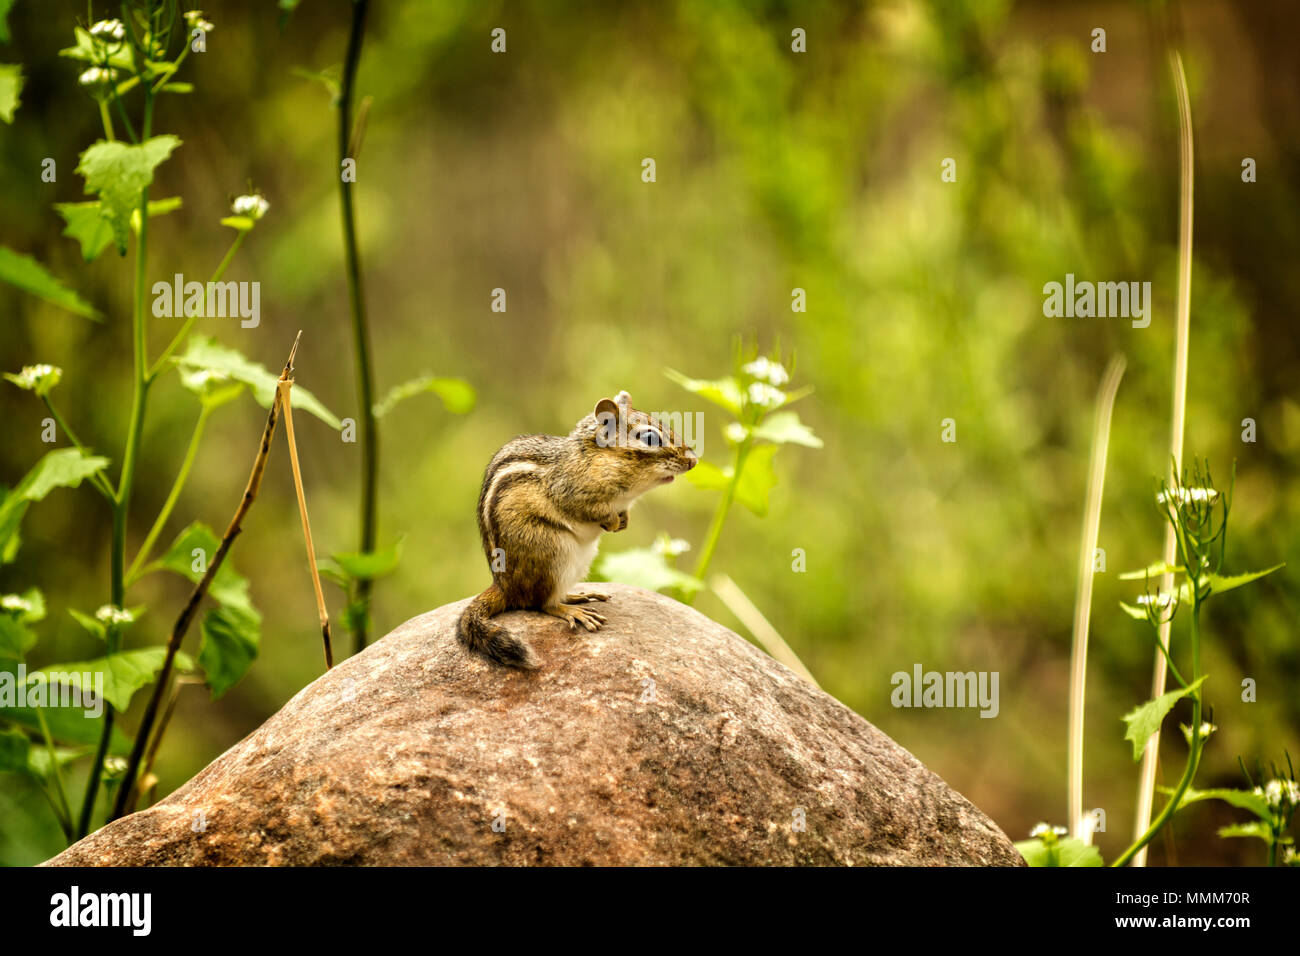 A cute Chipmunk sitting on a large rock. Stock Photo